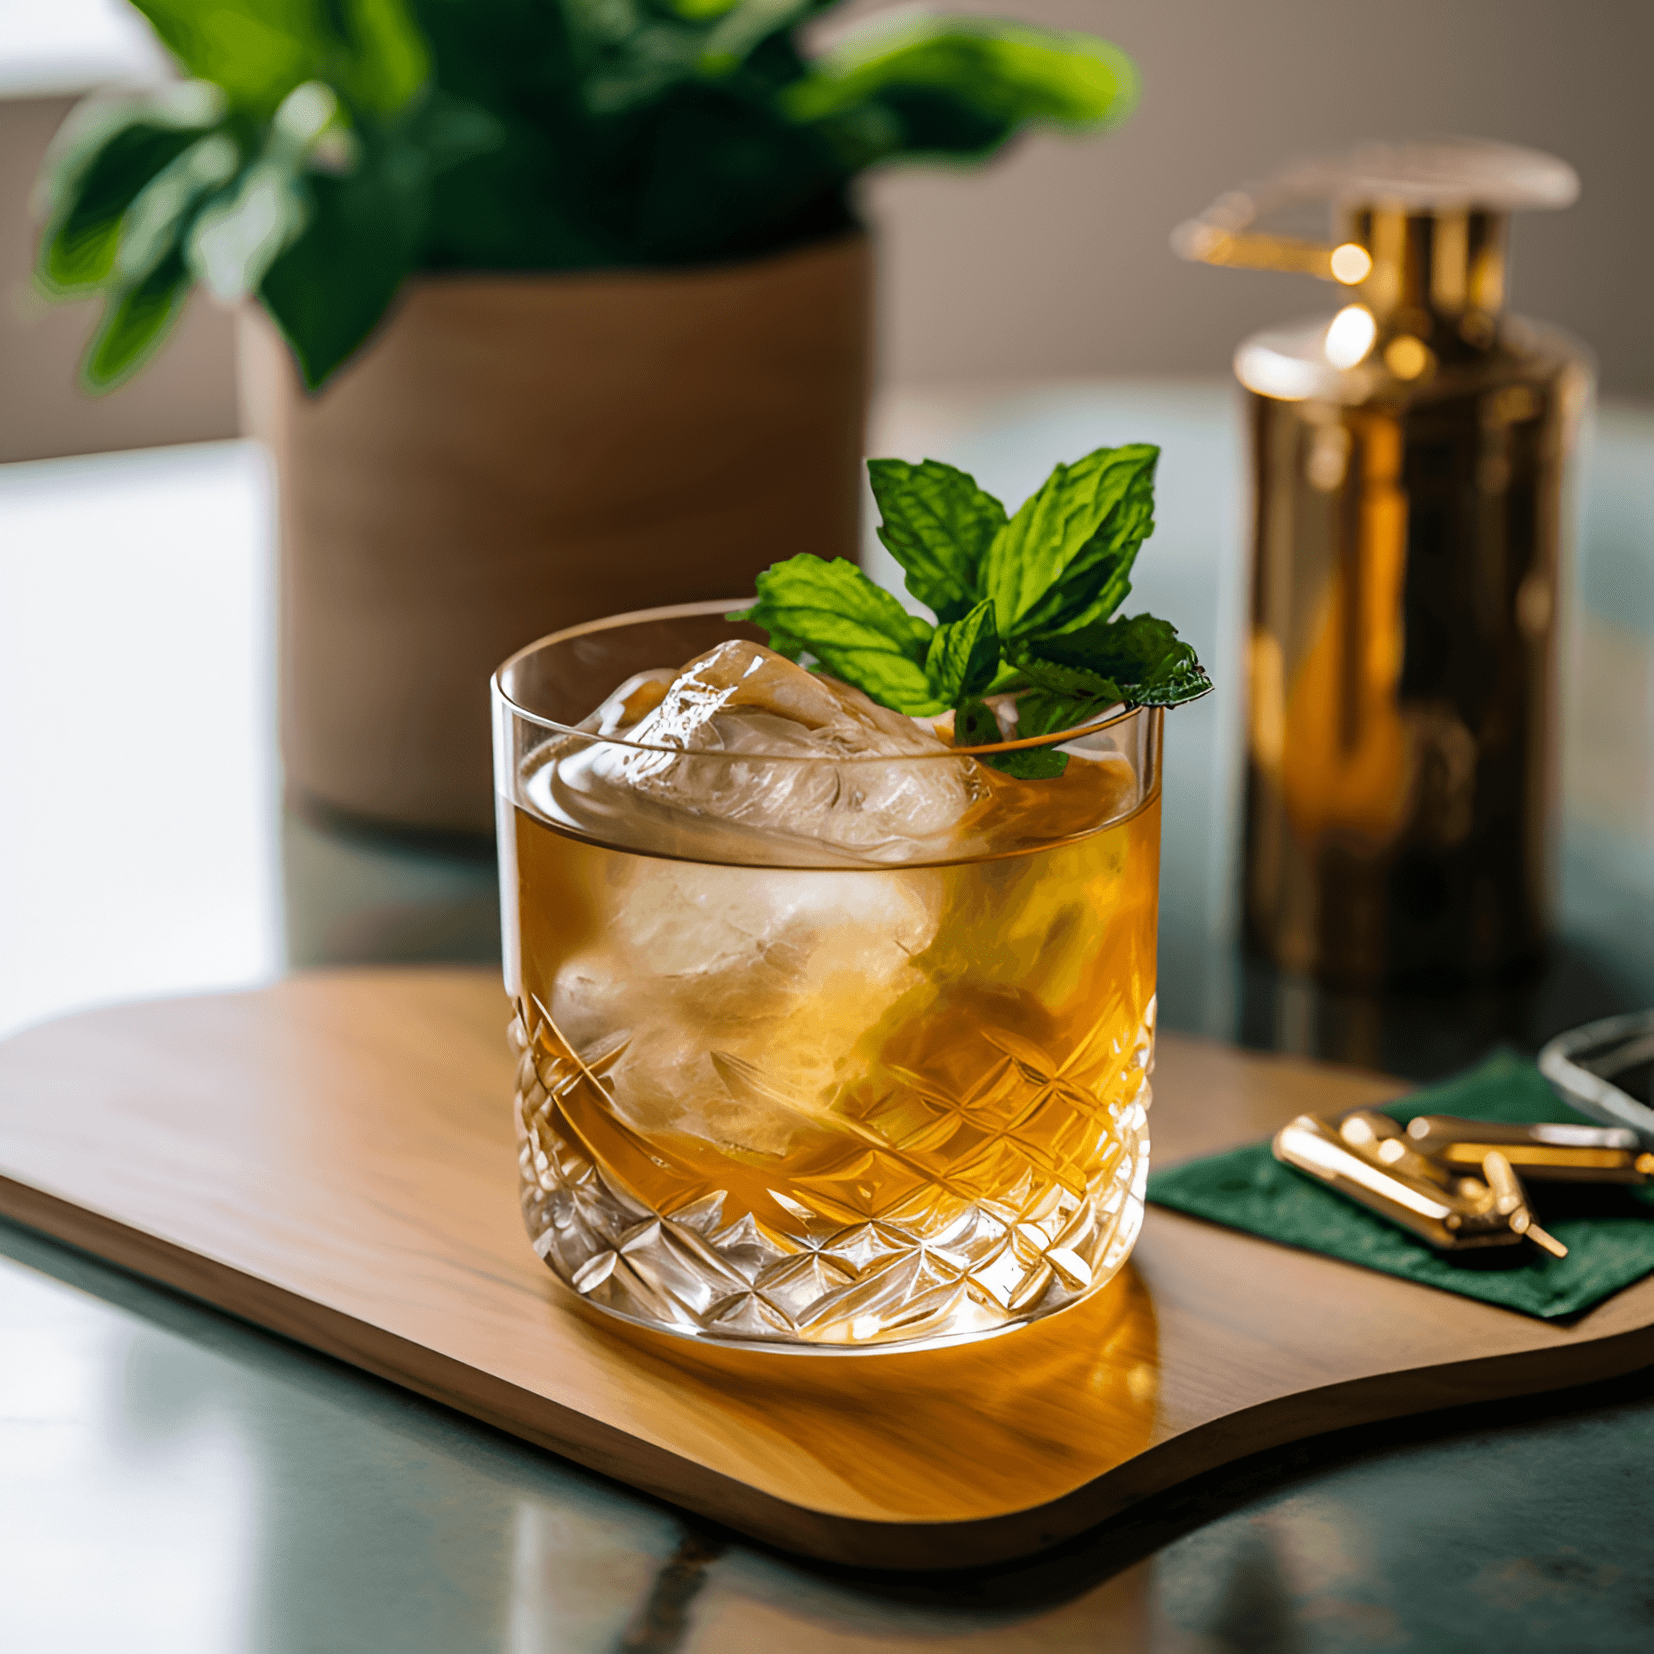 Cold Comfort Cocktail Recipe - The Cold Comfort cocktail has a well-balanced taste, with a combination of sweet, sour, and herbal notes. The whiskey provides a warm, smooth base, while the lemon juice adds a tangy, refreshing element. The simple syrup brings a touch of sweetness, and the mint leaves contribute a cool, fresh finish.